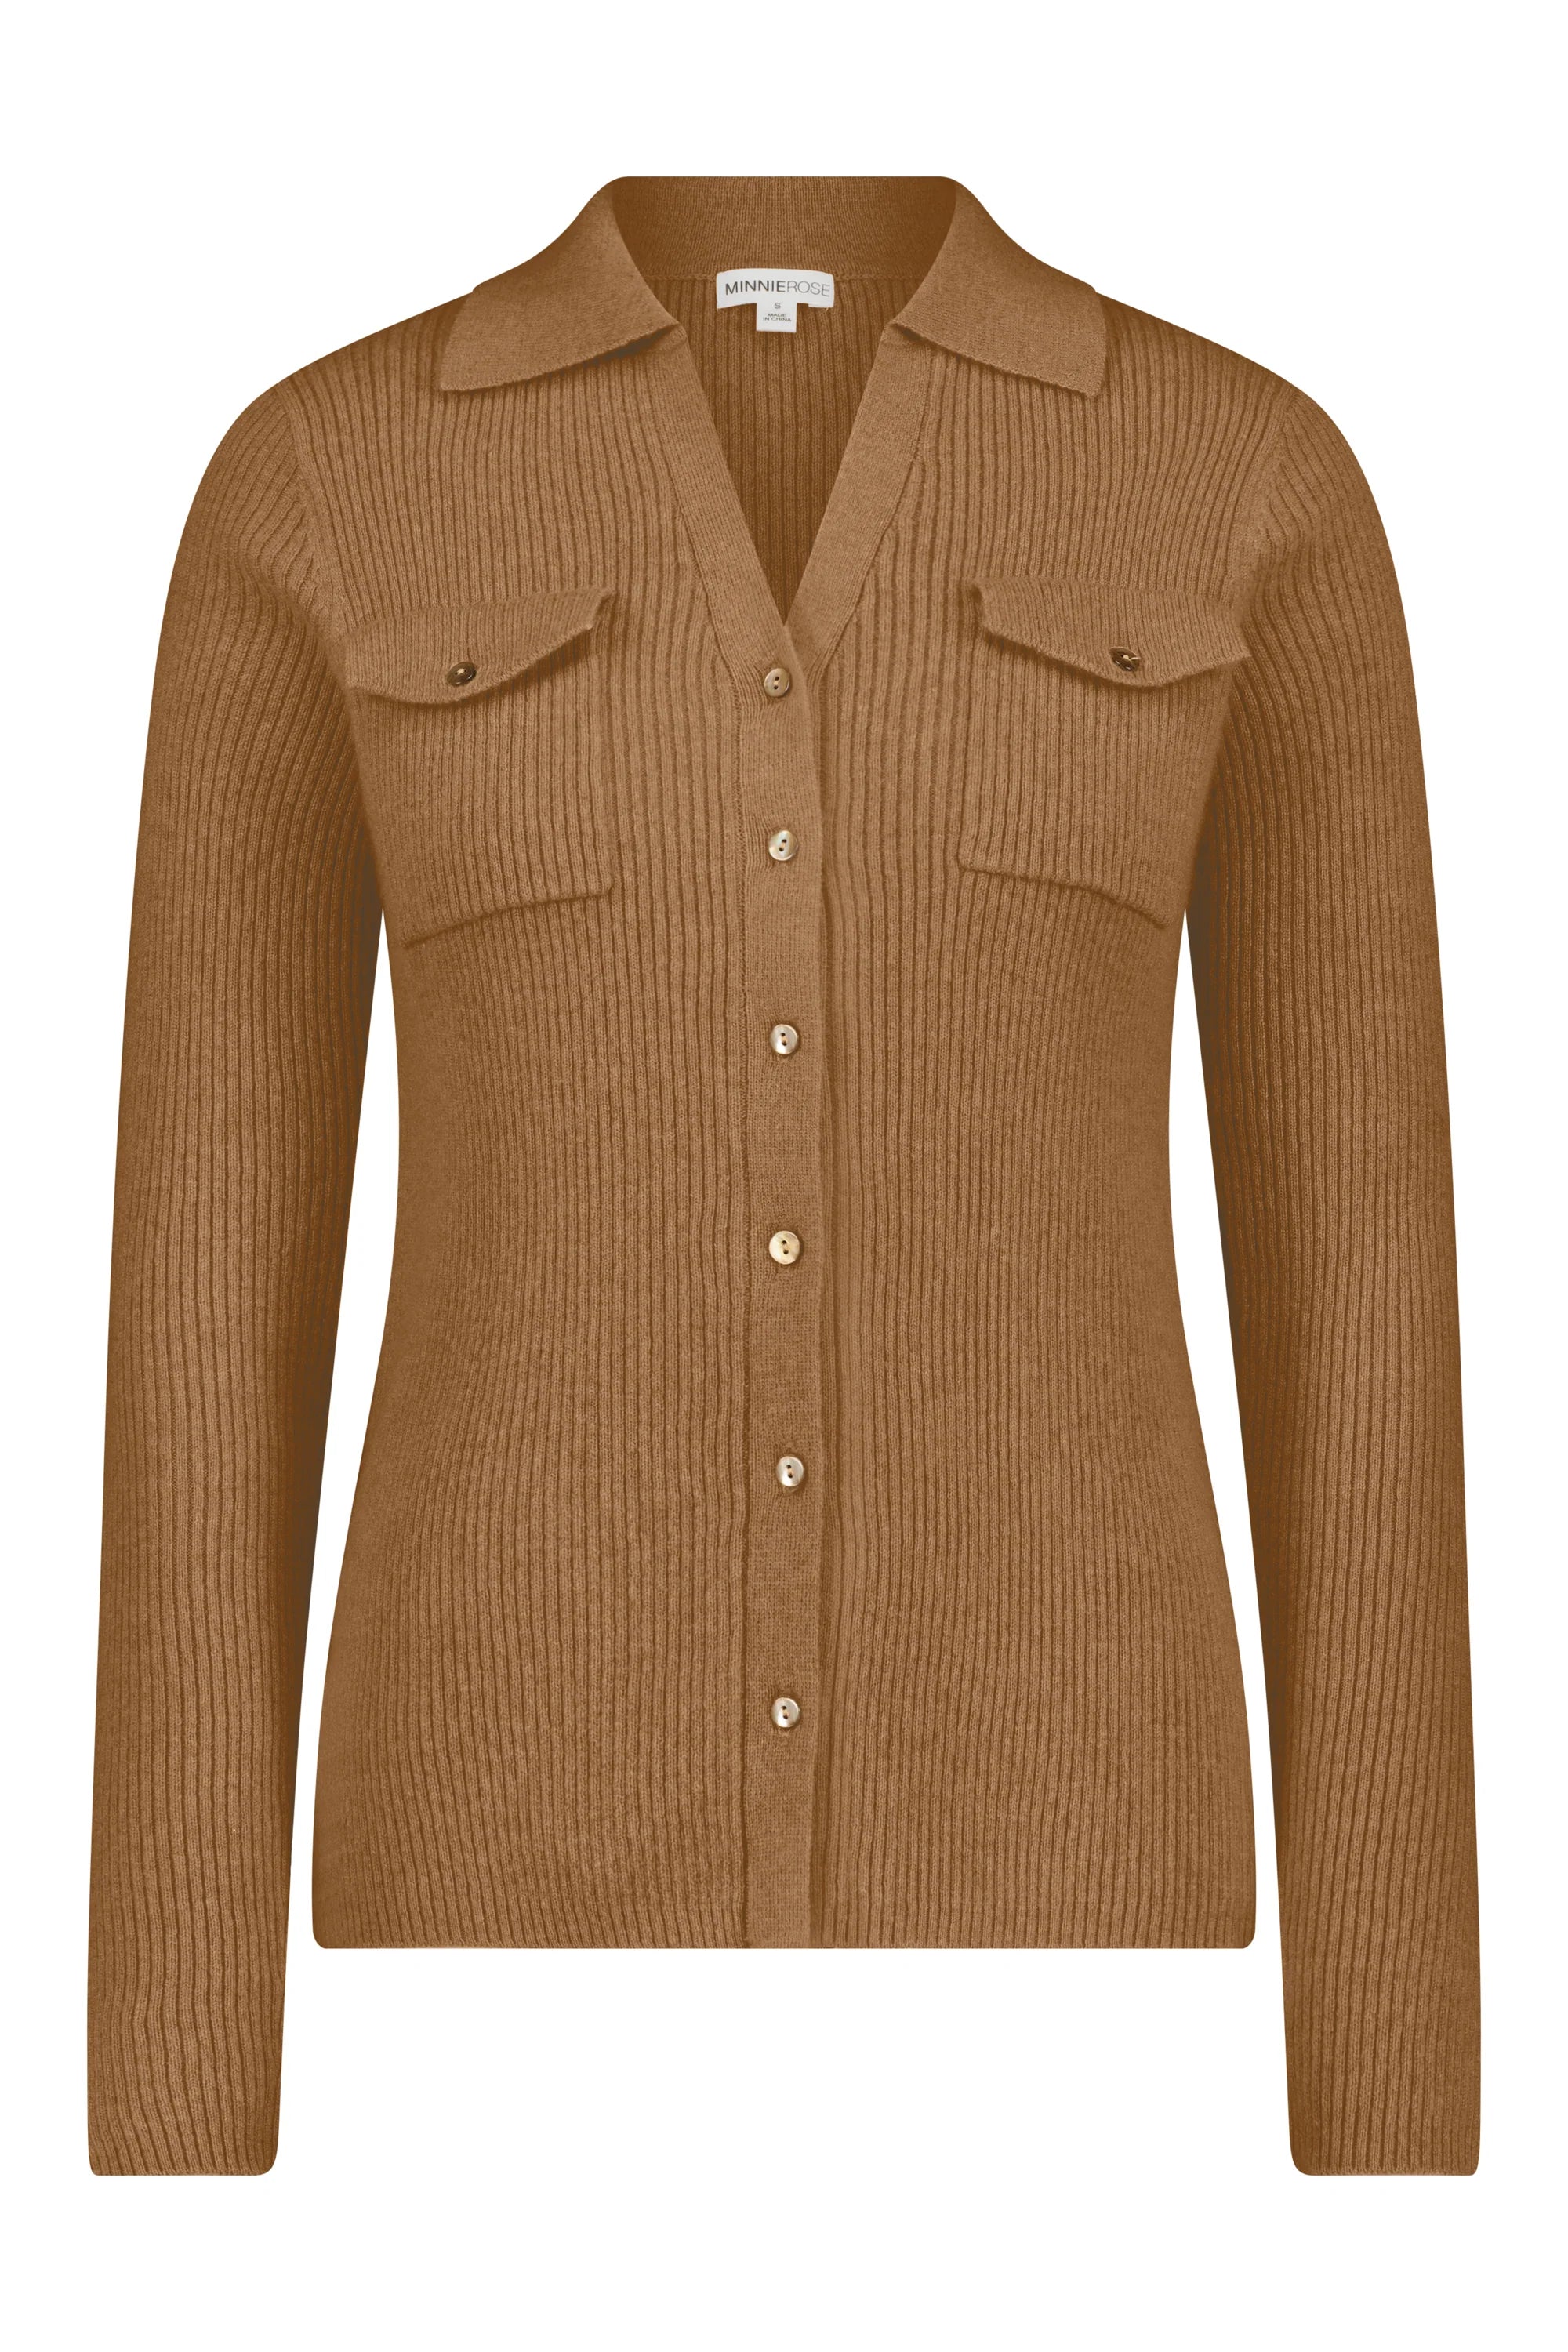 Minnie Rose Ribbed Cashmere Cardigan with pockets